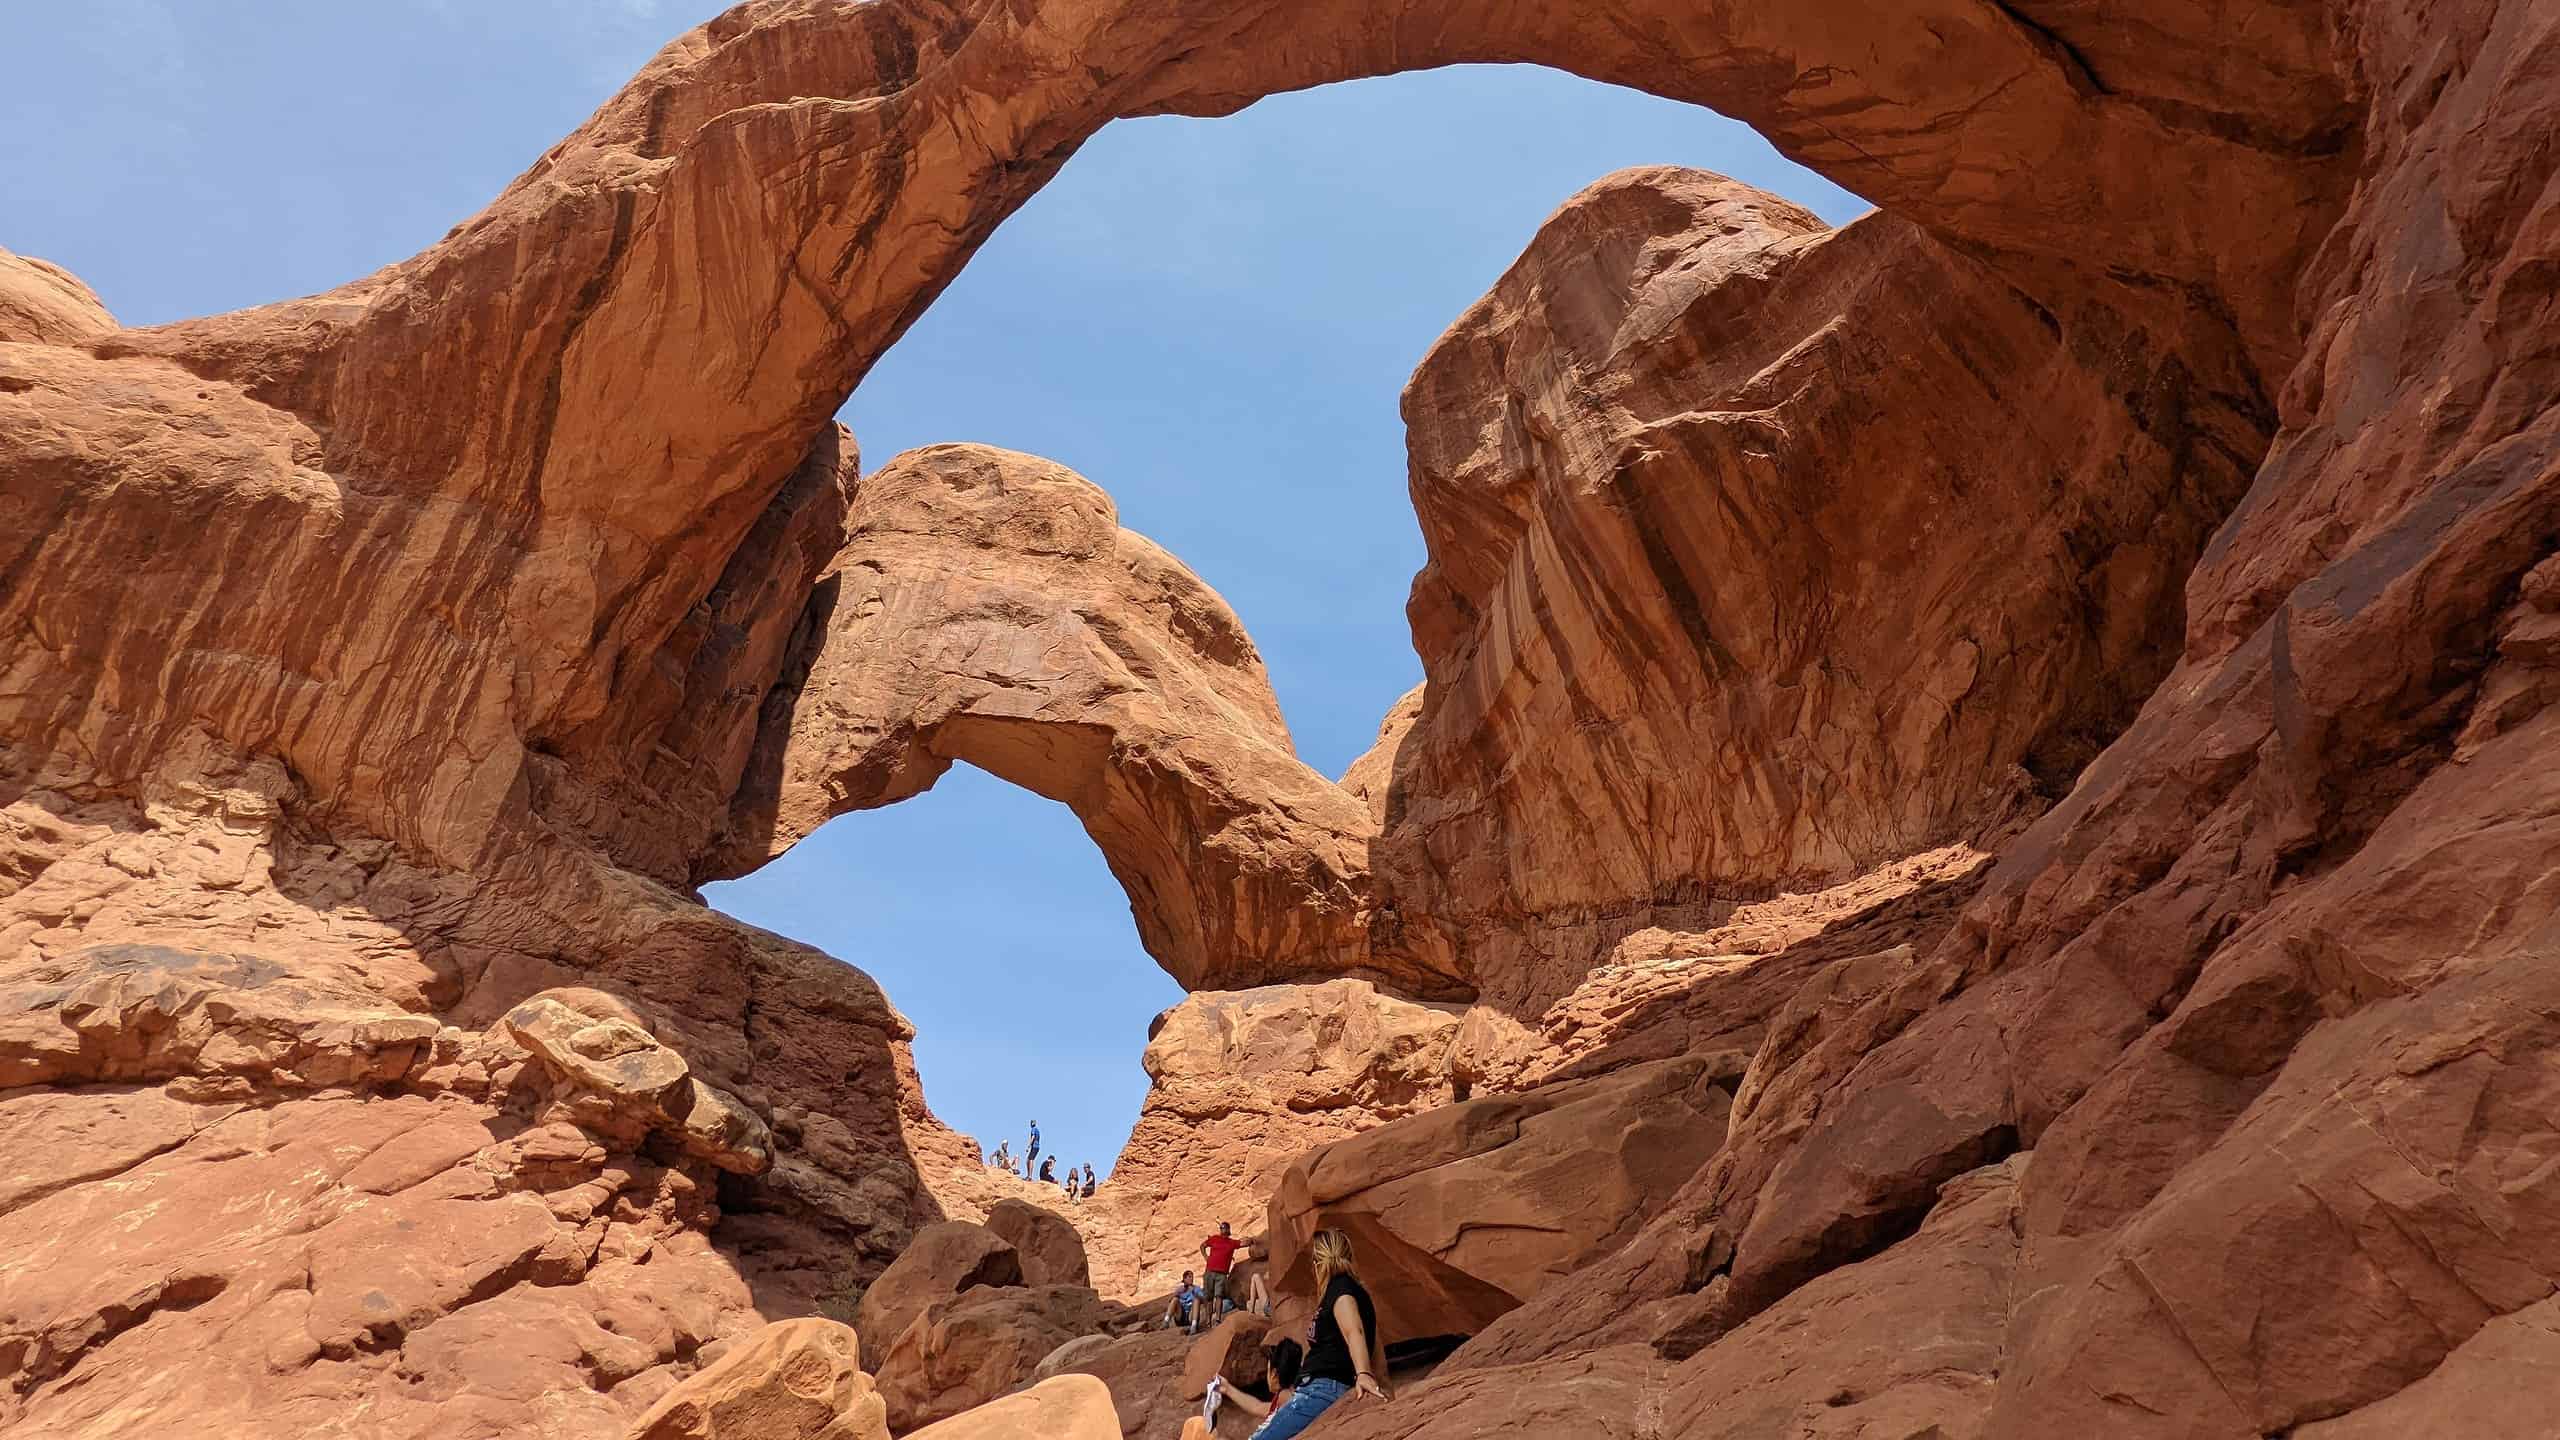 Scenic view of Double Arch red rock formation at Arches National Park in Moab, Utah. Tourist attraction.